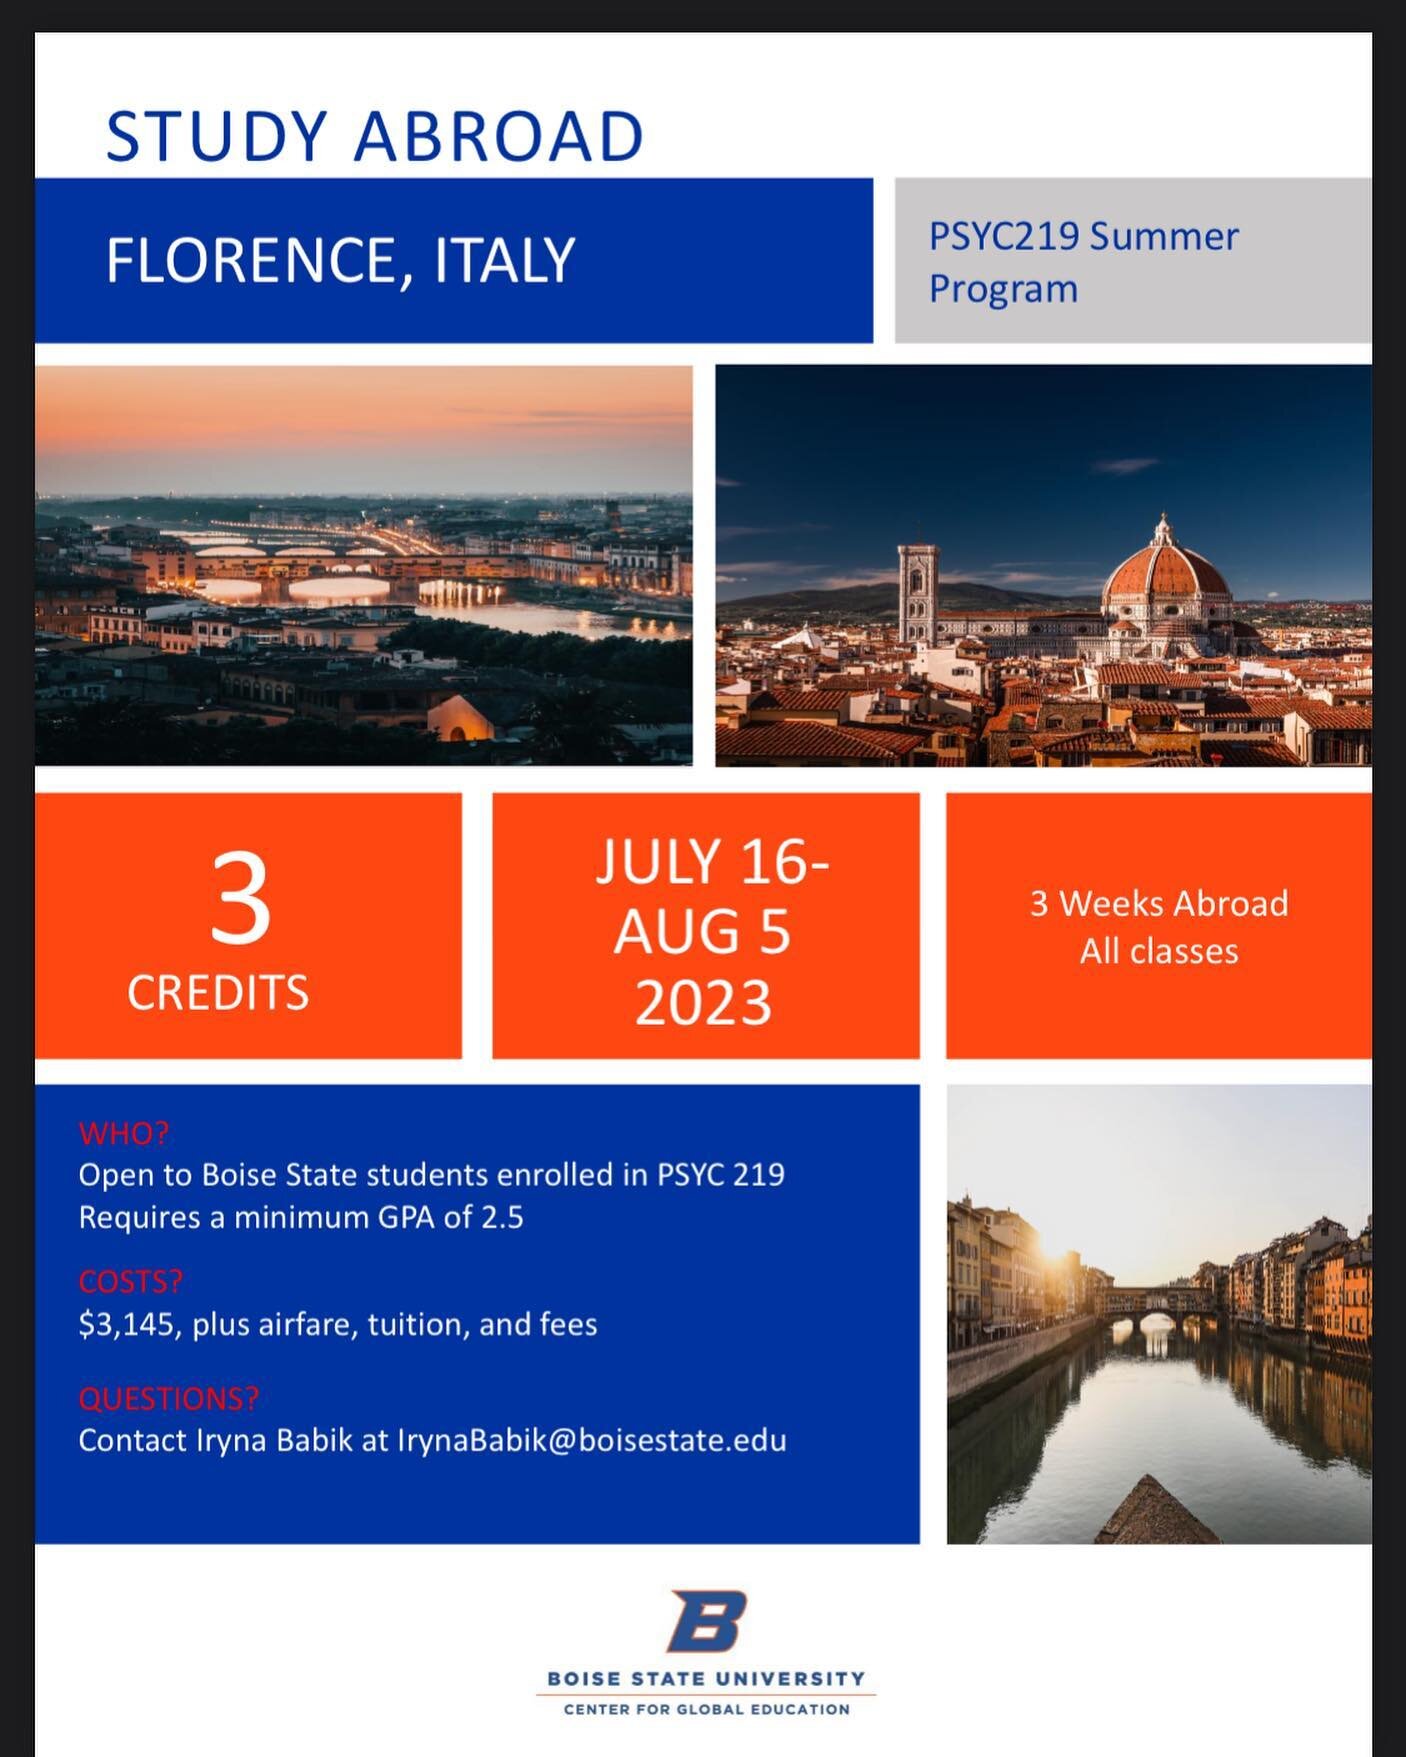 PSYC 219:  Cross Cultural Psychology in Florence, Italy! 

Open to all students🙌🏽

Deadline is March 1st.

www.italyabroadprogram.com